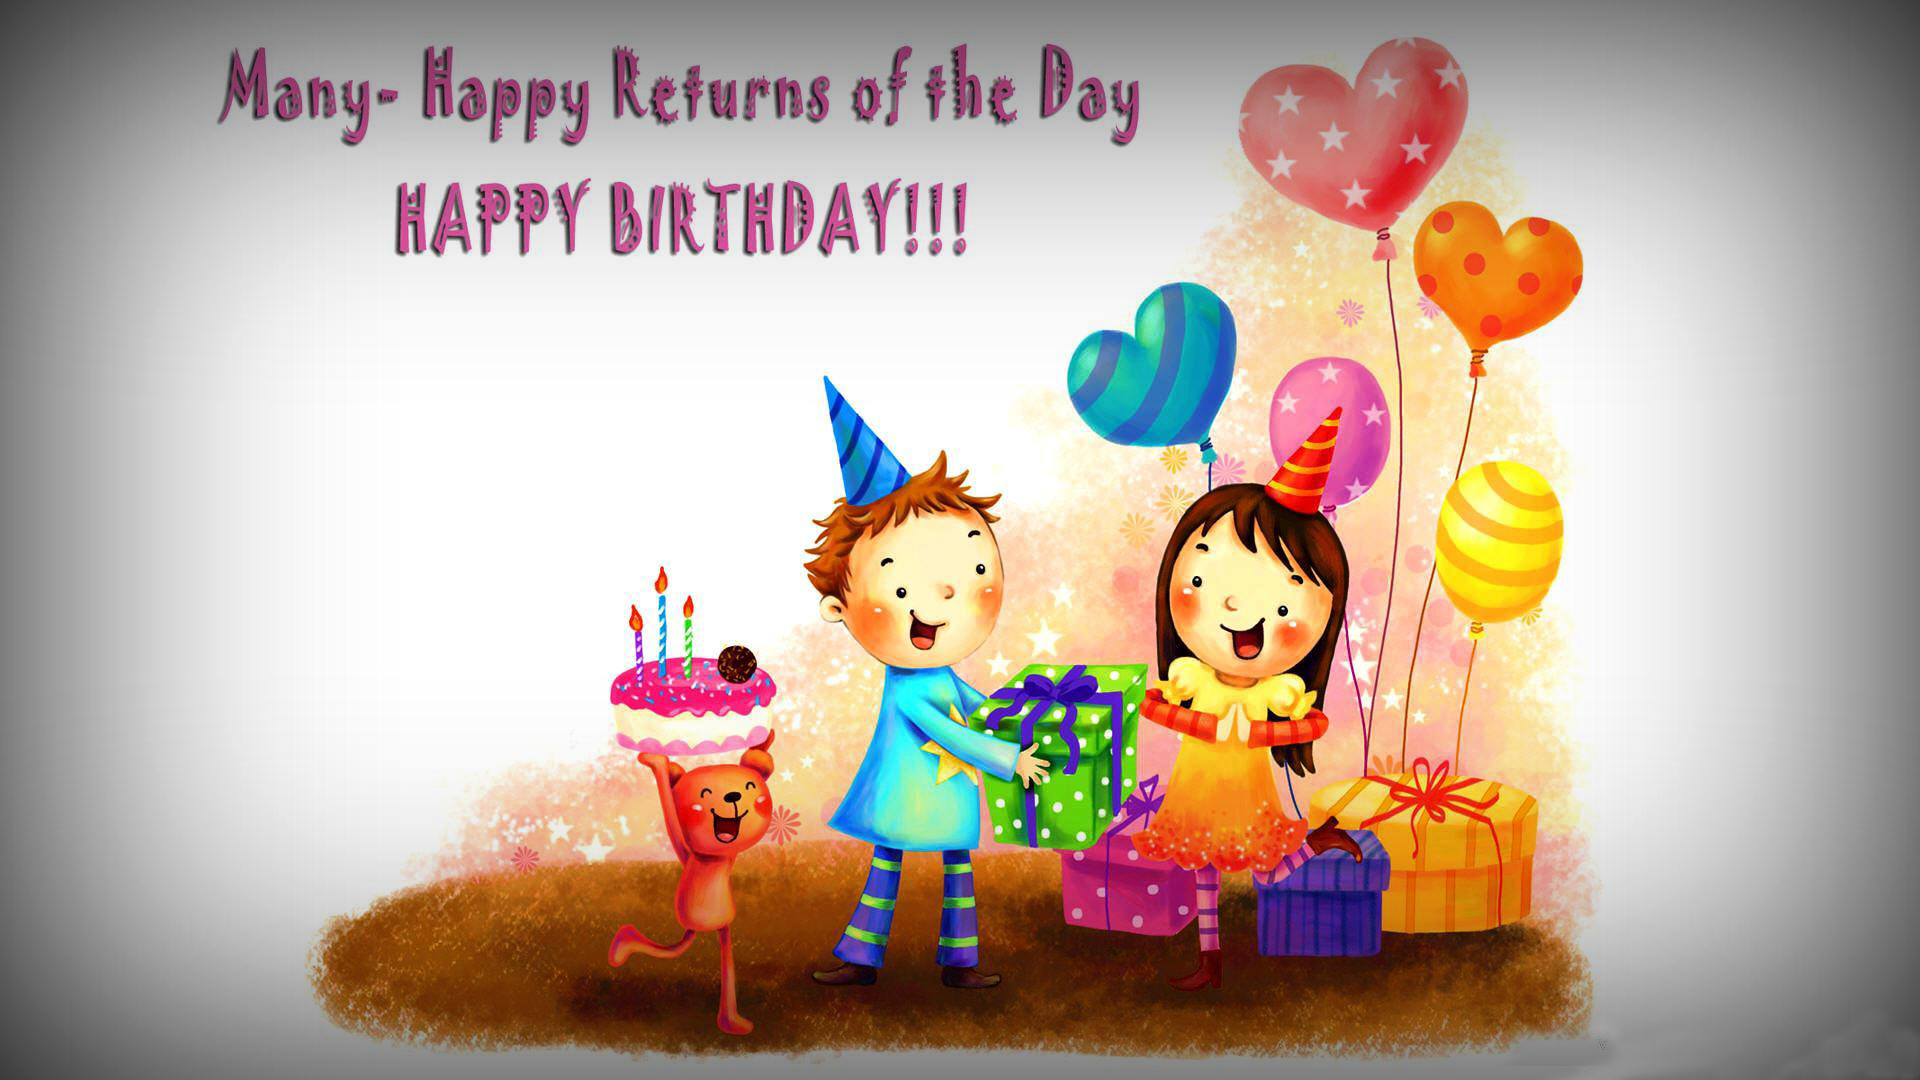 1920x1080 Happy birthday best friend animated photo for you